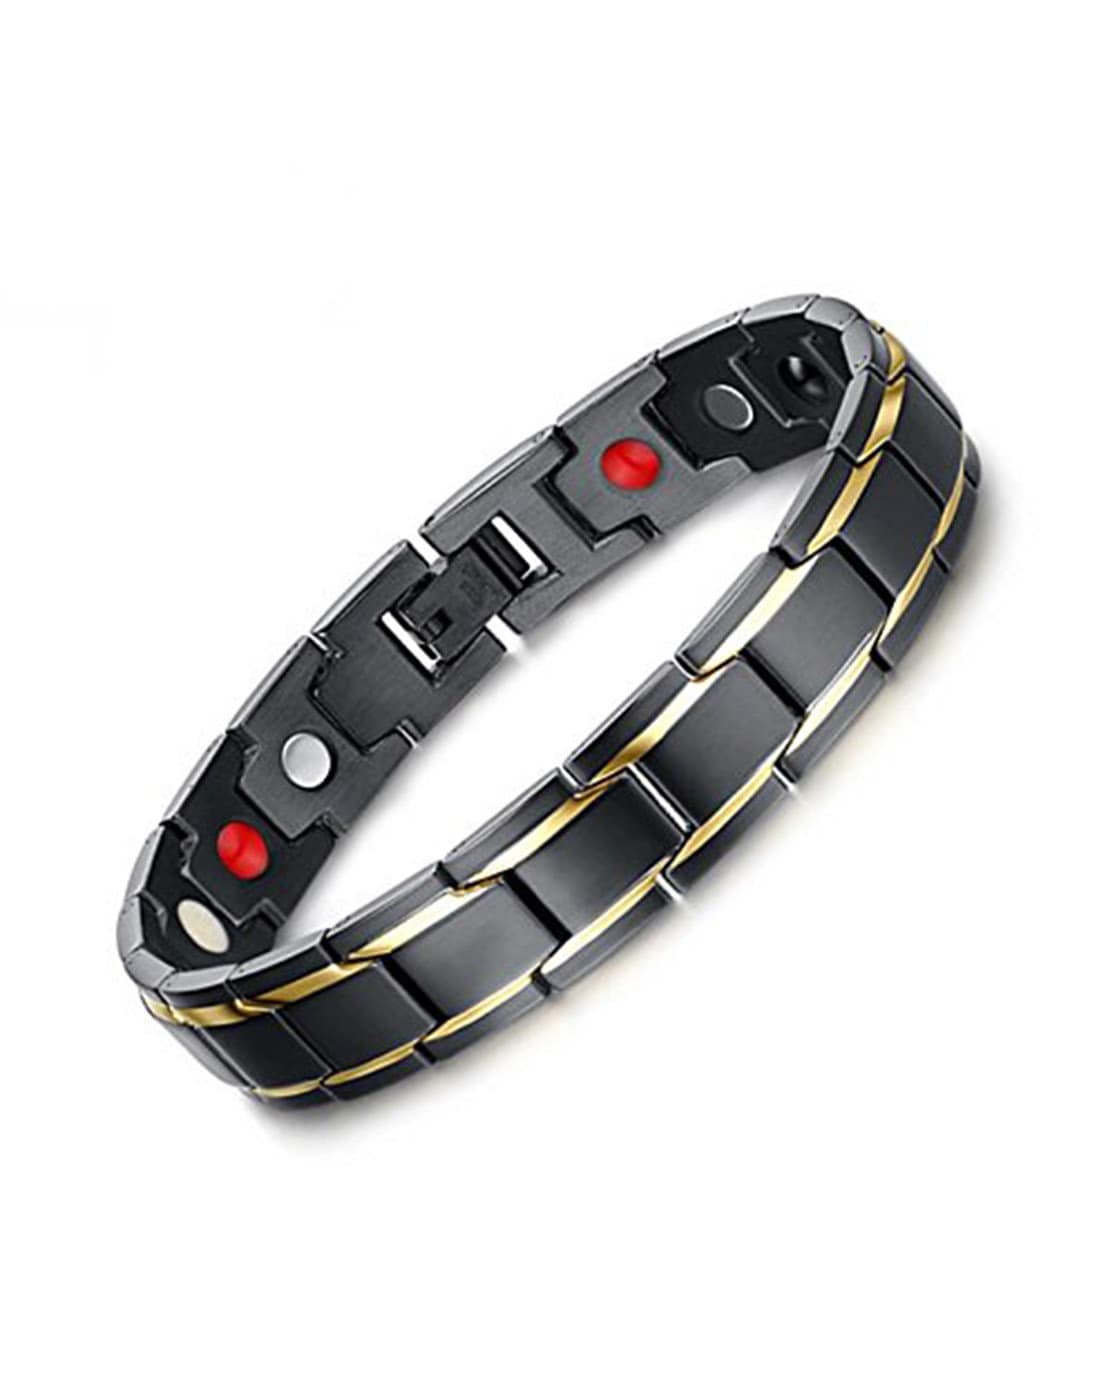 Titanium Magnetic Bracelet With Golden Coating For Pain Relief